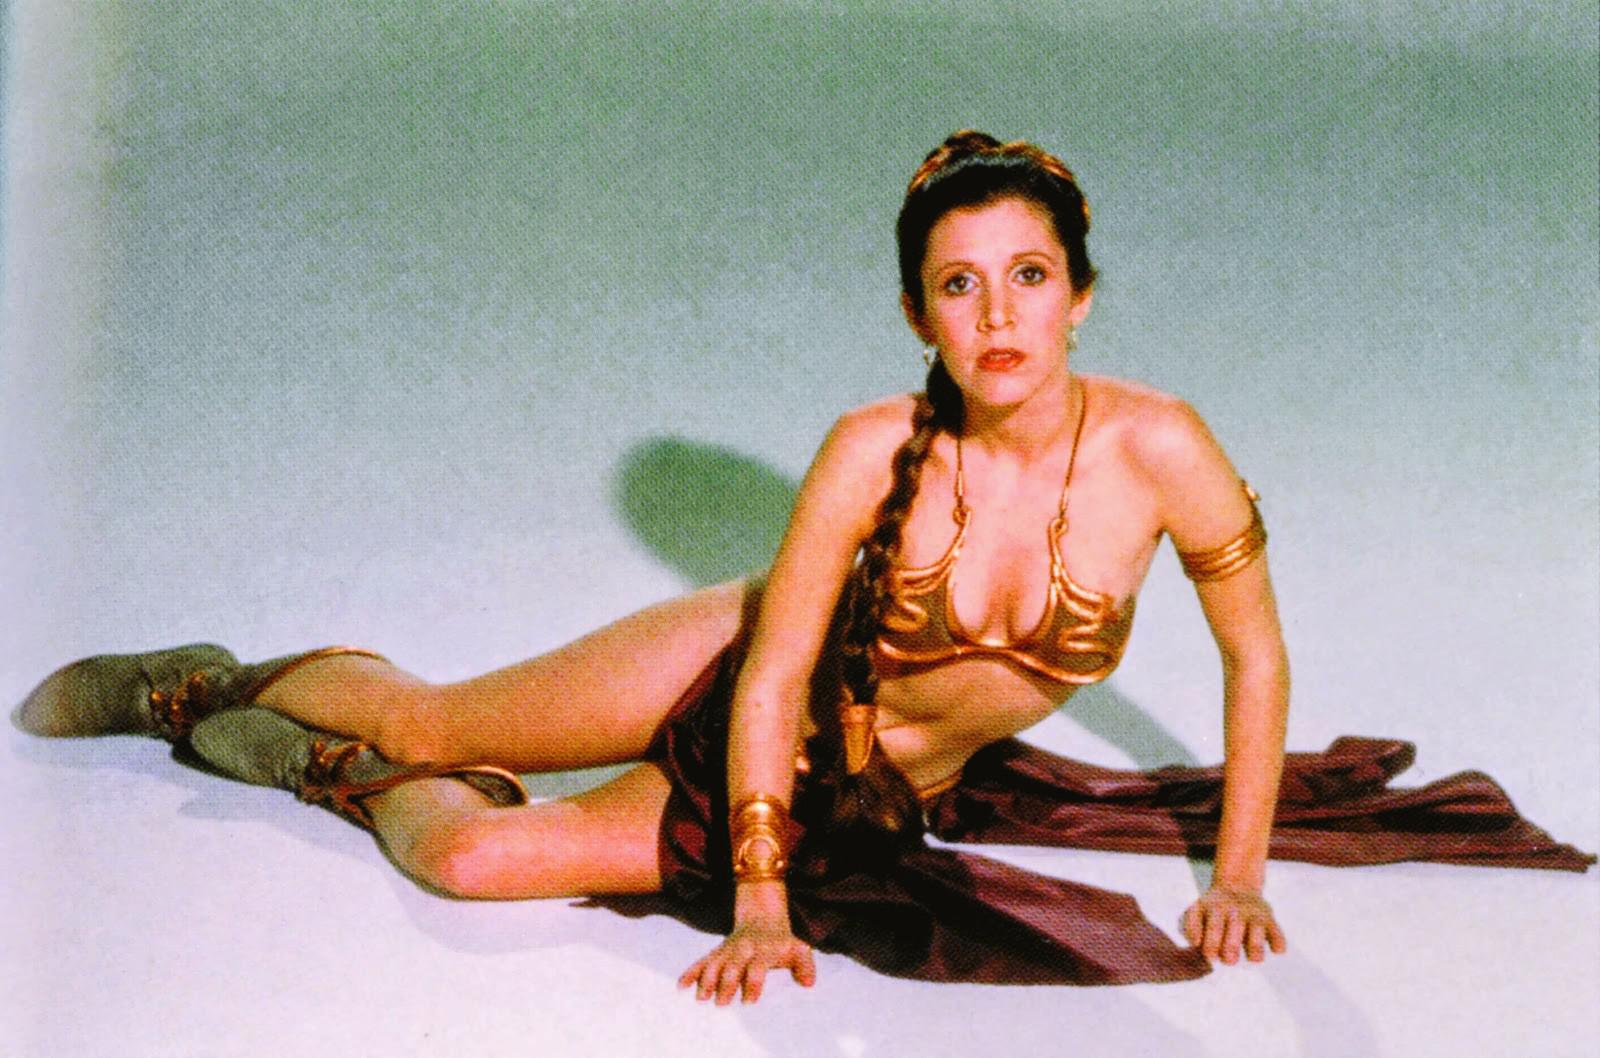 Throbbing hard for Carrie Fisher as Slave Leia. Let's see who else is donating their load for this goddess.